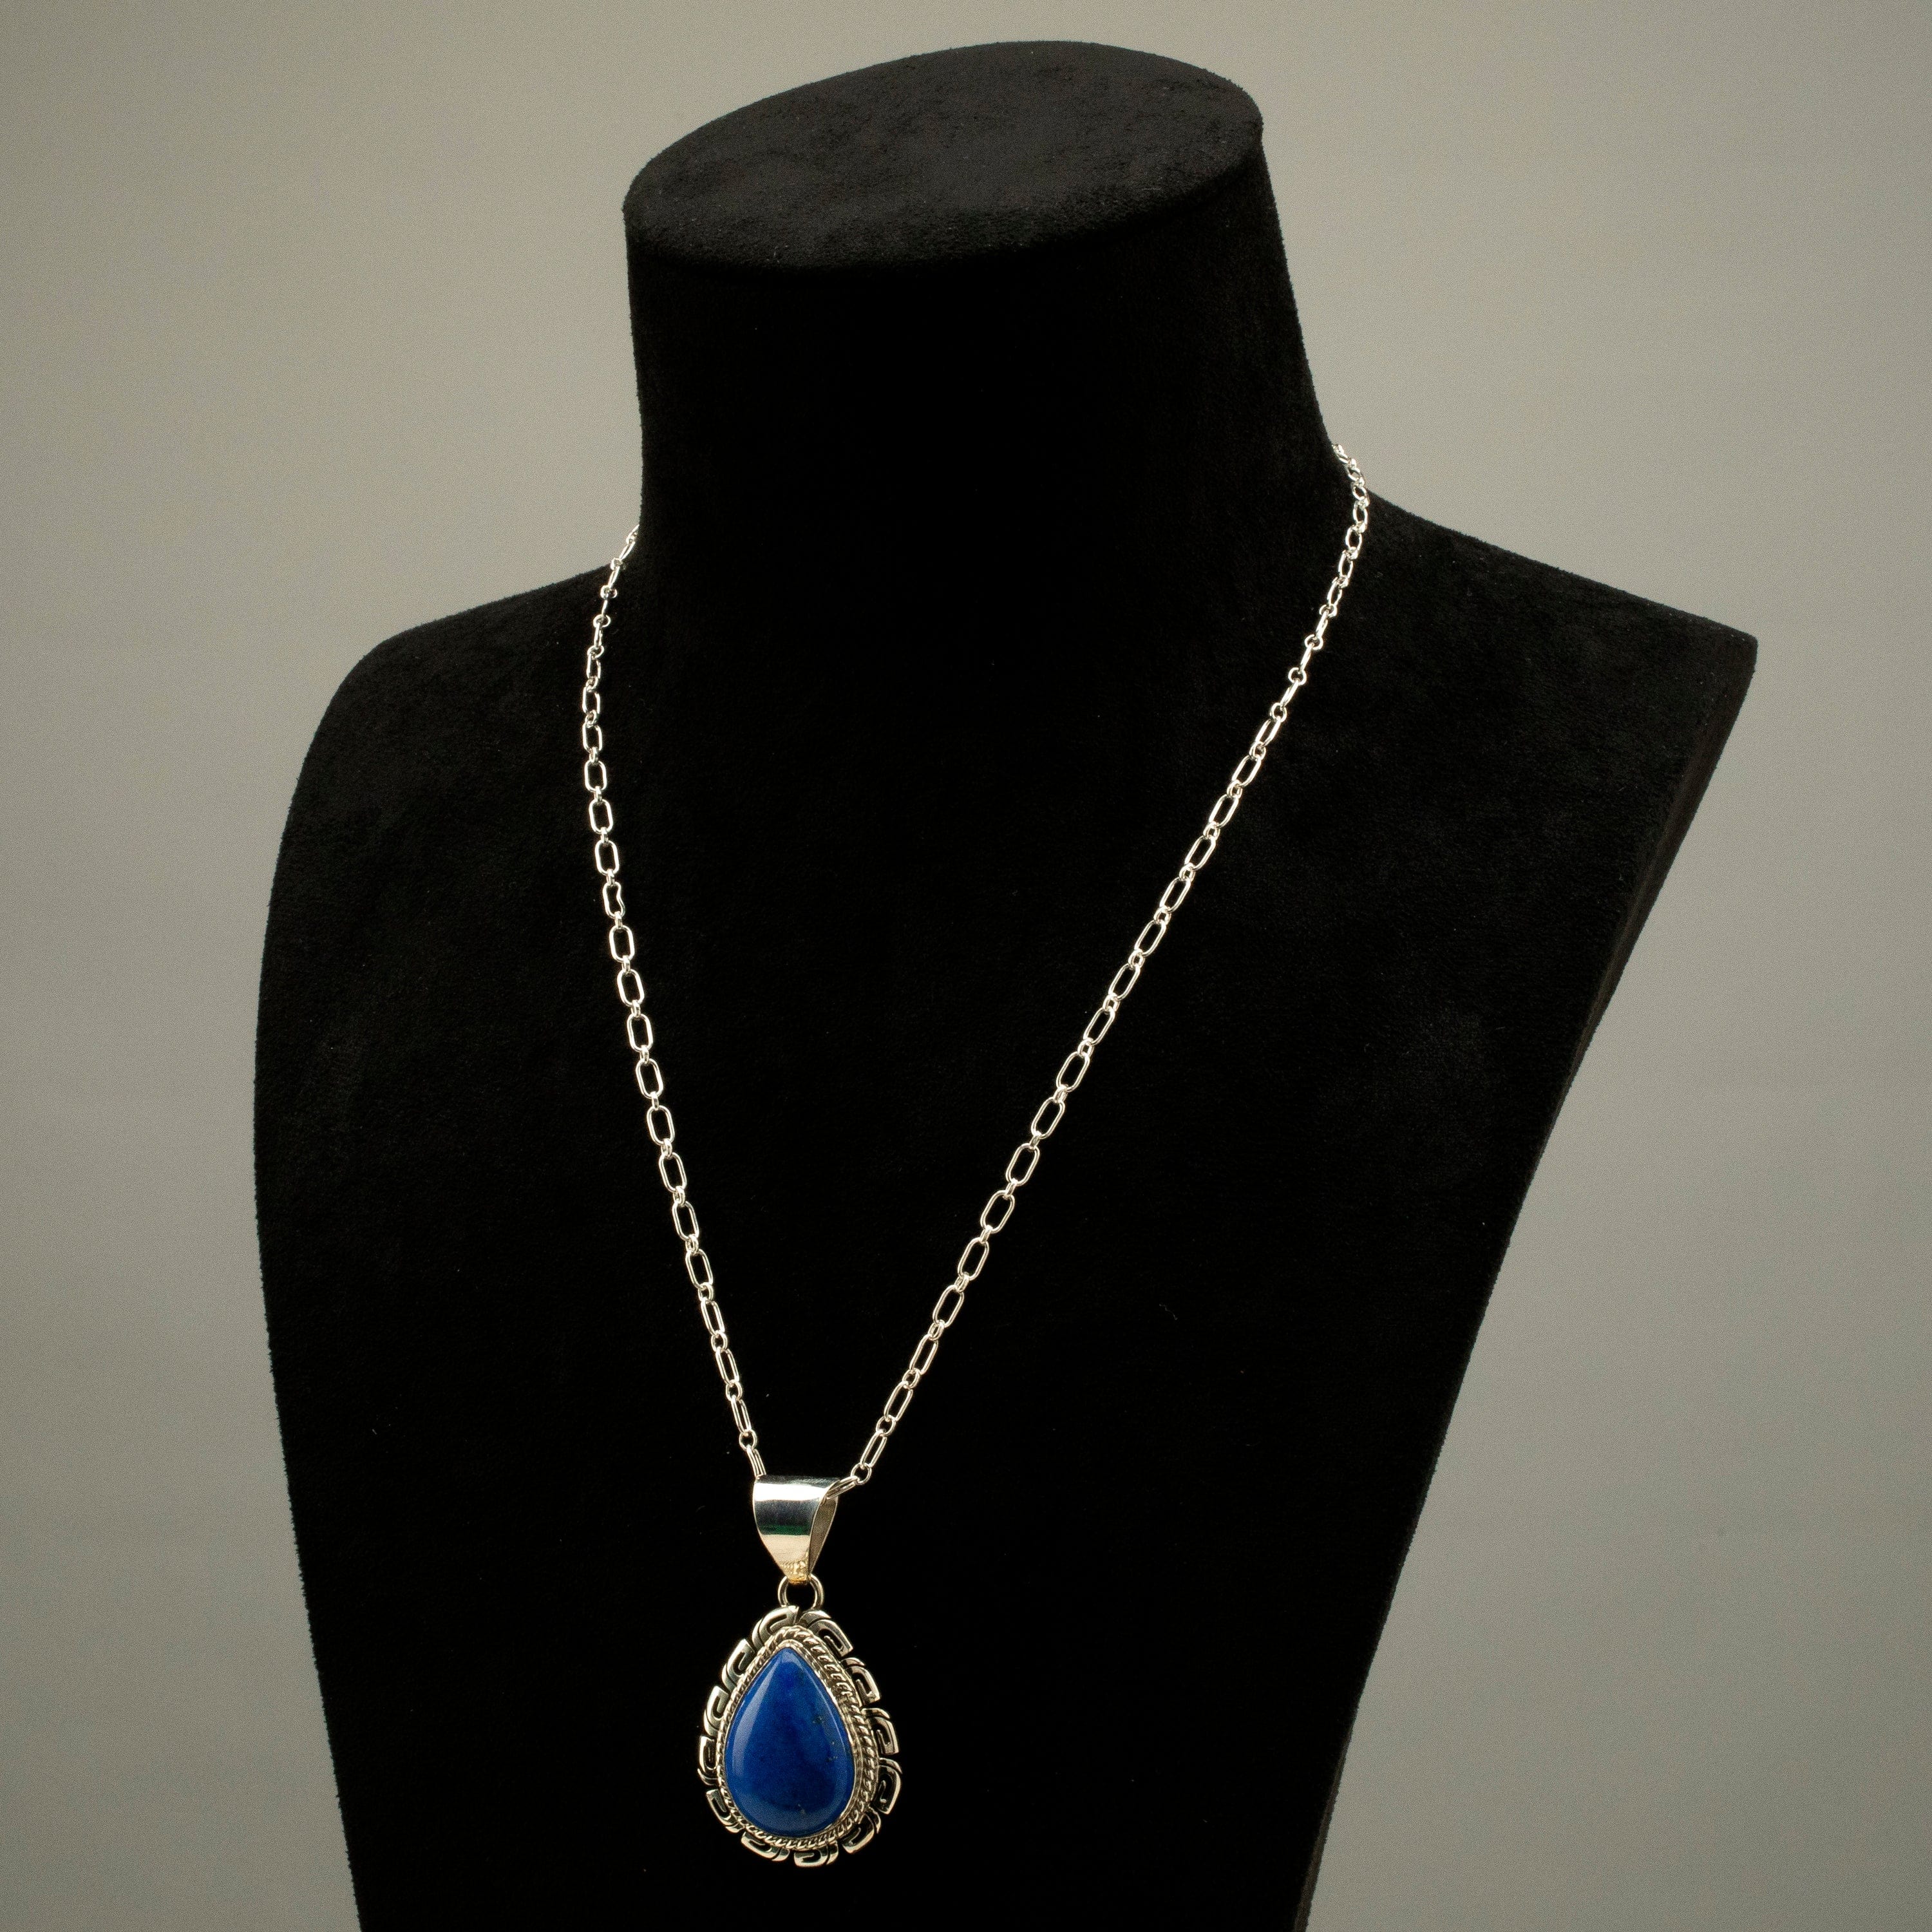 Kalifano Native American Jewelry 20" R. Hoskie Dine Lapis Teardrop USA Native American Made 925 Sterling Silver Necklace NAN700.013